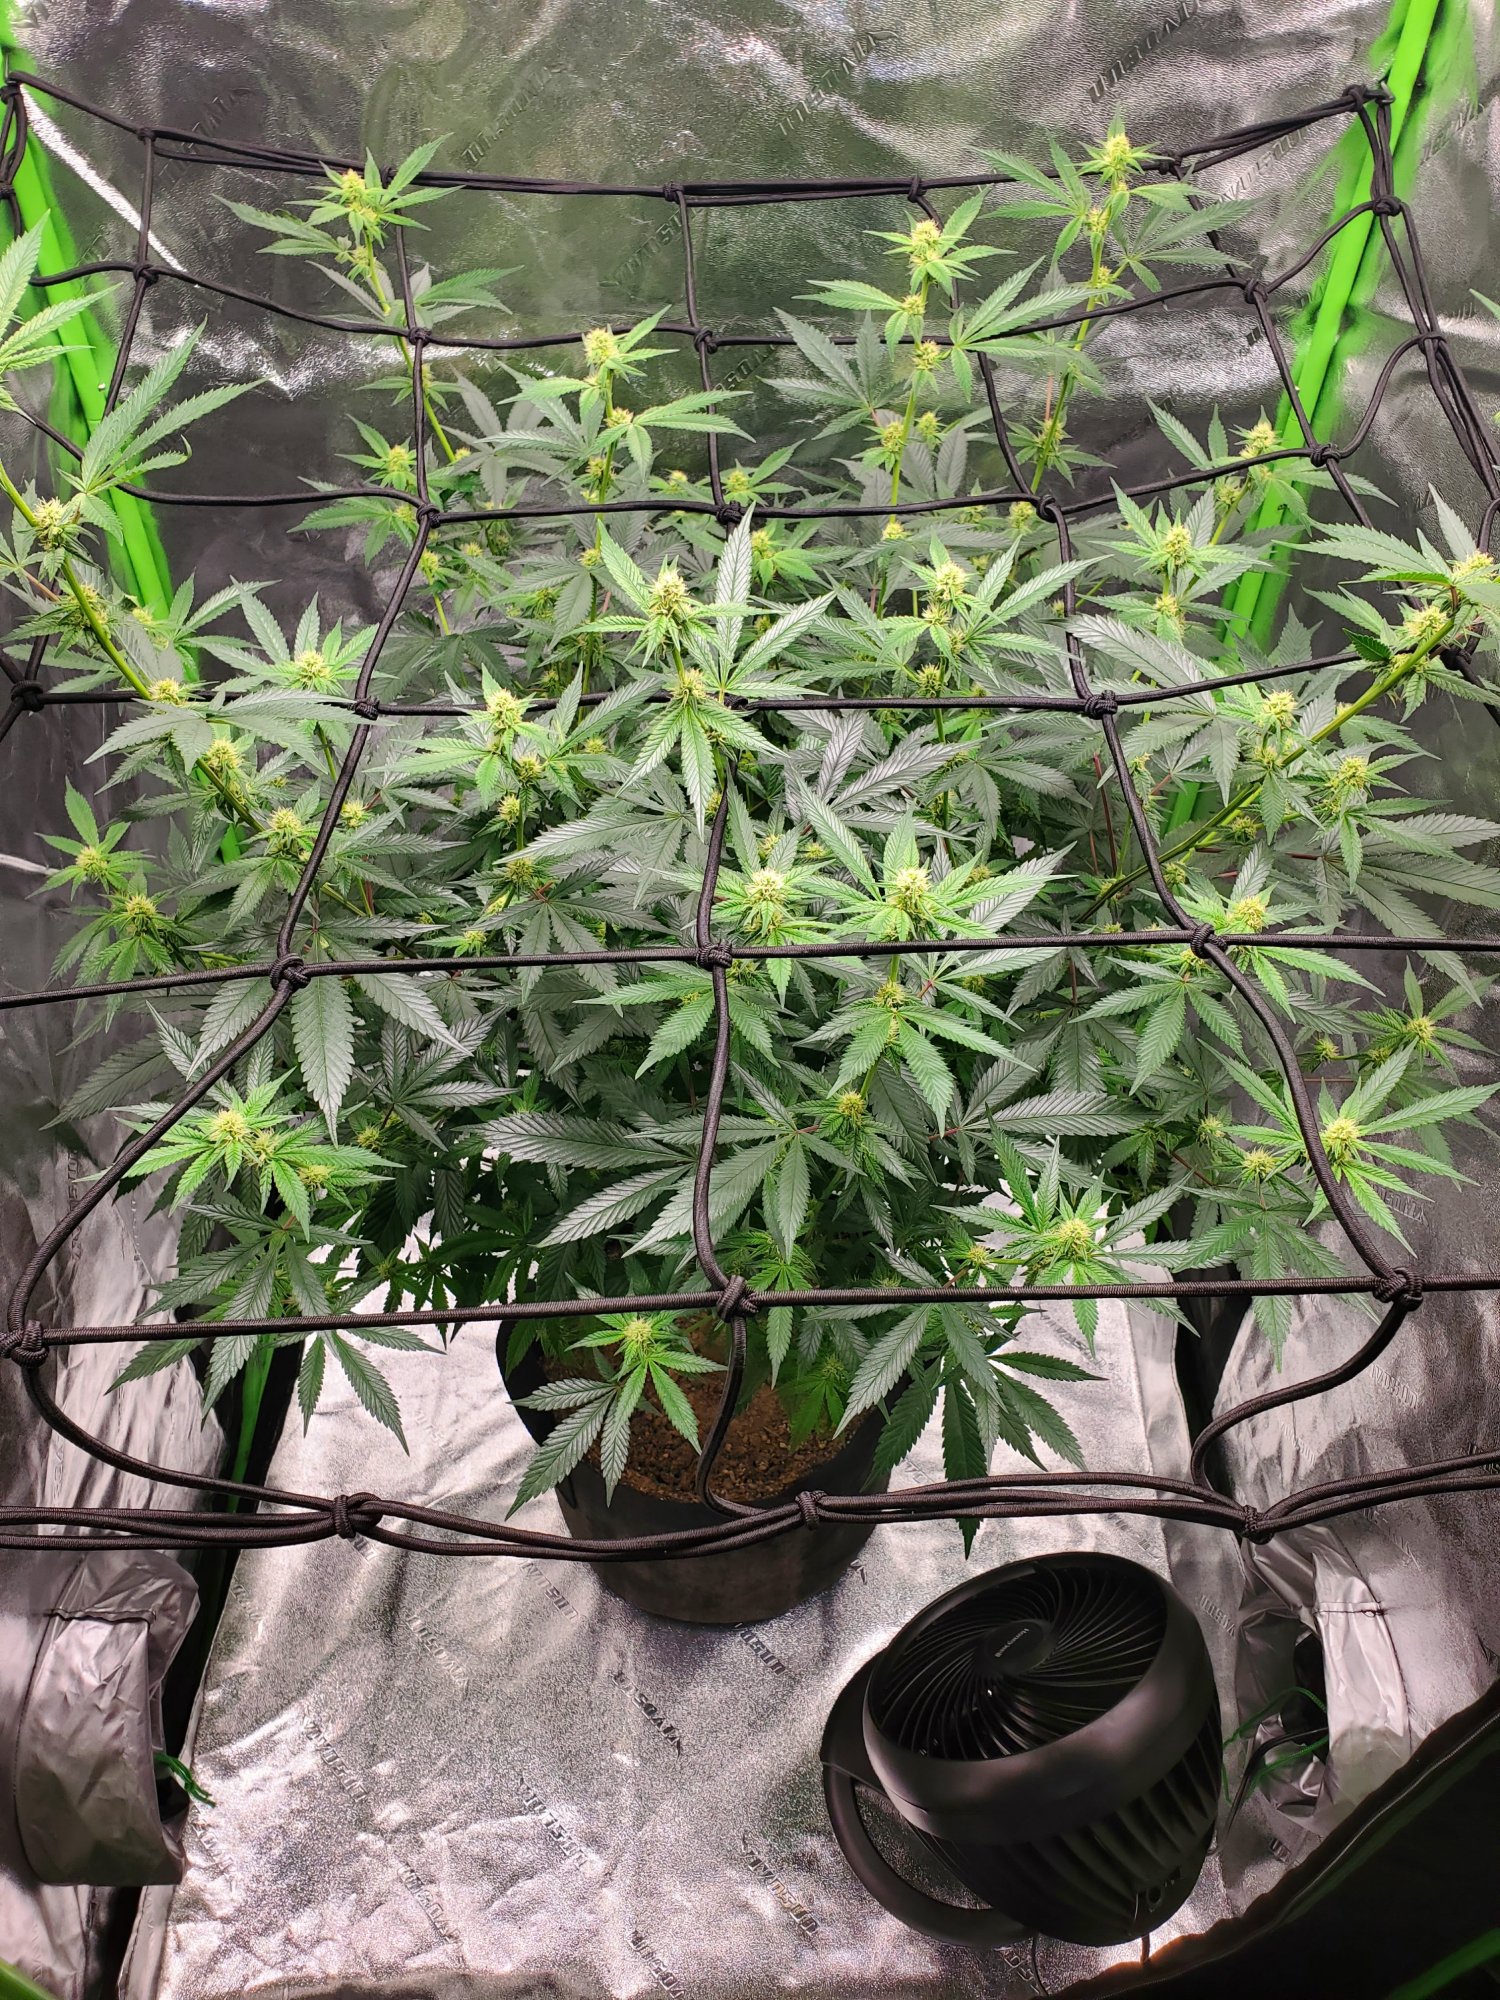 Thrips to black spots to leaf tips curling up in week 4 flower 15